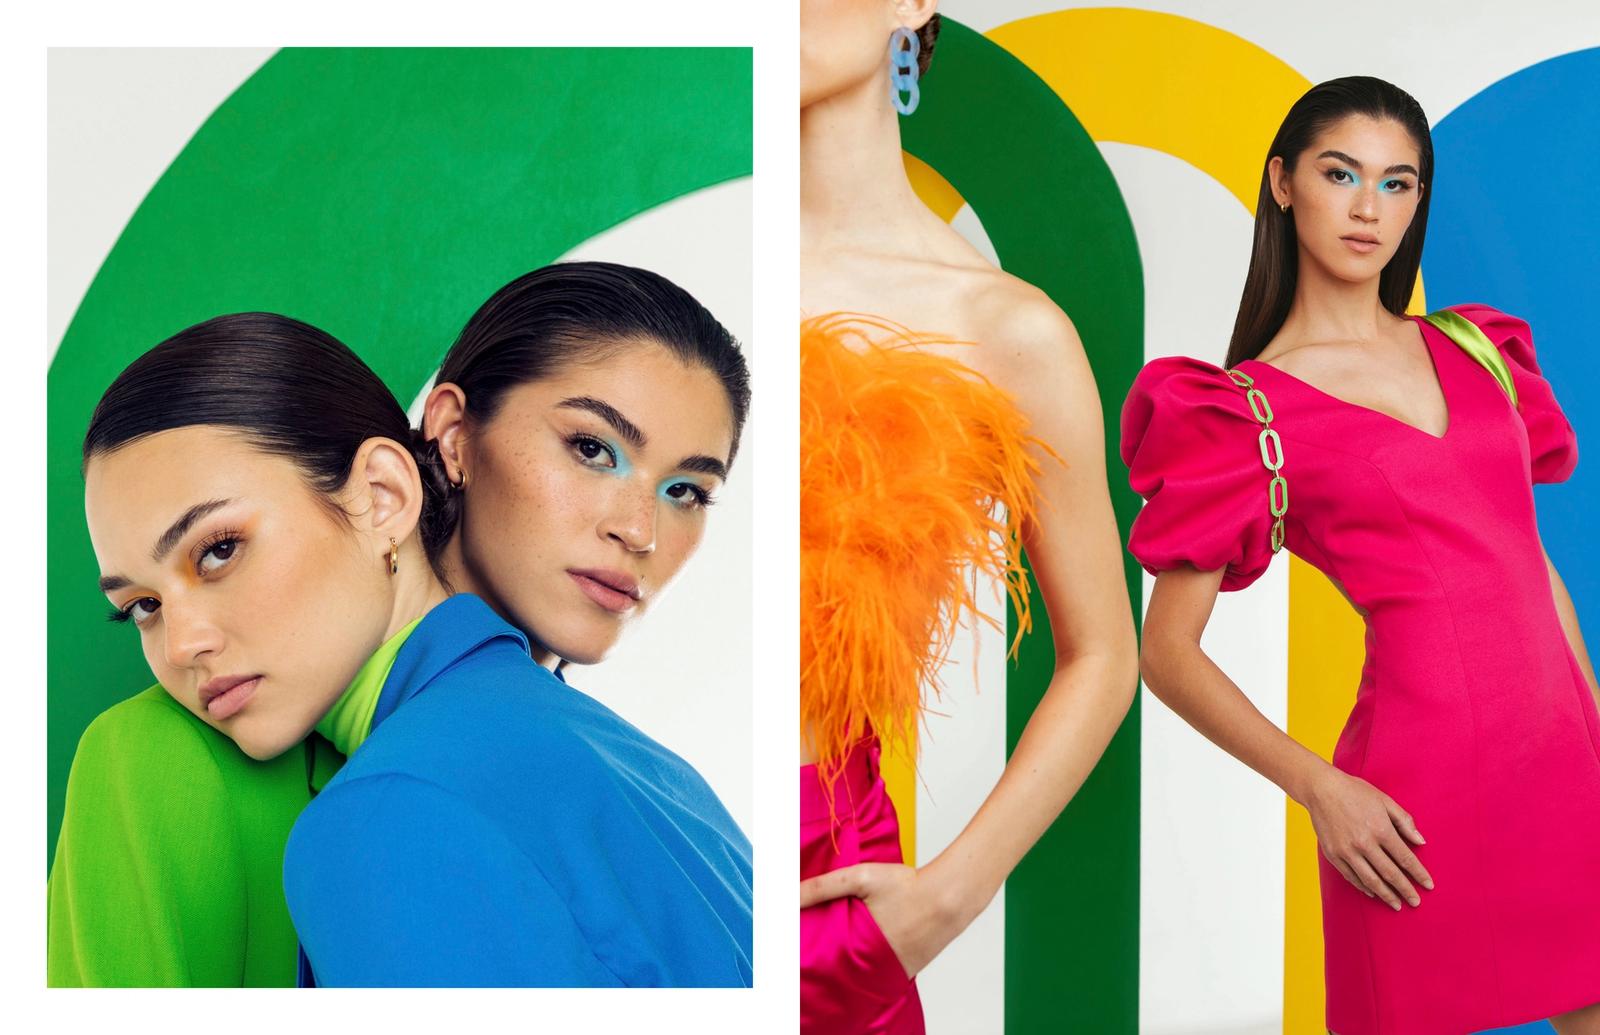 Playing with shapes and bold colors, comes a sexy whimsical take on modern fashion editorial. CREW NAMES AND INSTA TAGS  Photographer: Alexa Merico @lexeye_ Art Direction/Styling: Mackenzie Meyer @macphotographyxx Makeup: Melis Cifcili @meliscifcili Hair: Jovani Fonseca @sstaackz Model: Caroline Churchill @carolinechurchill Model: Mattea Dordevic @matteadordevic Studio: @thewarehouse_miami Set Assistant: Dara Weinstein @dara.weinstein Arches: @dreamerseventsllc